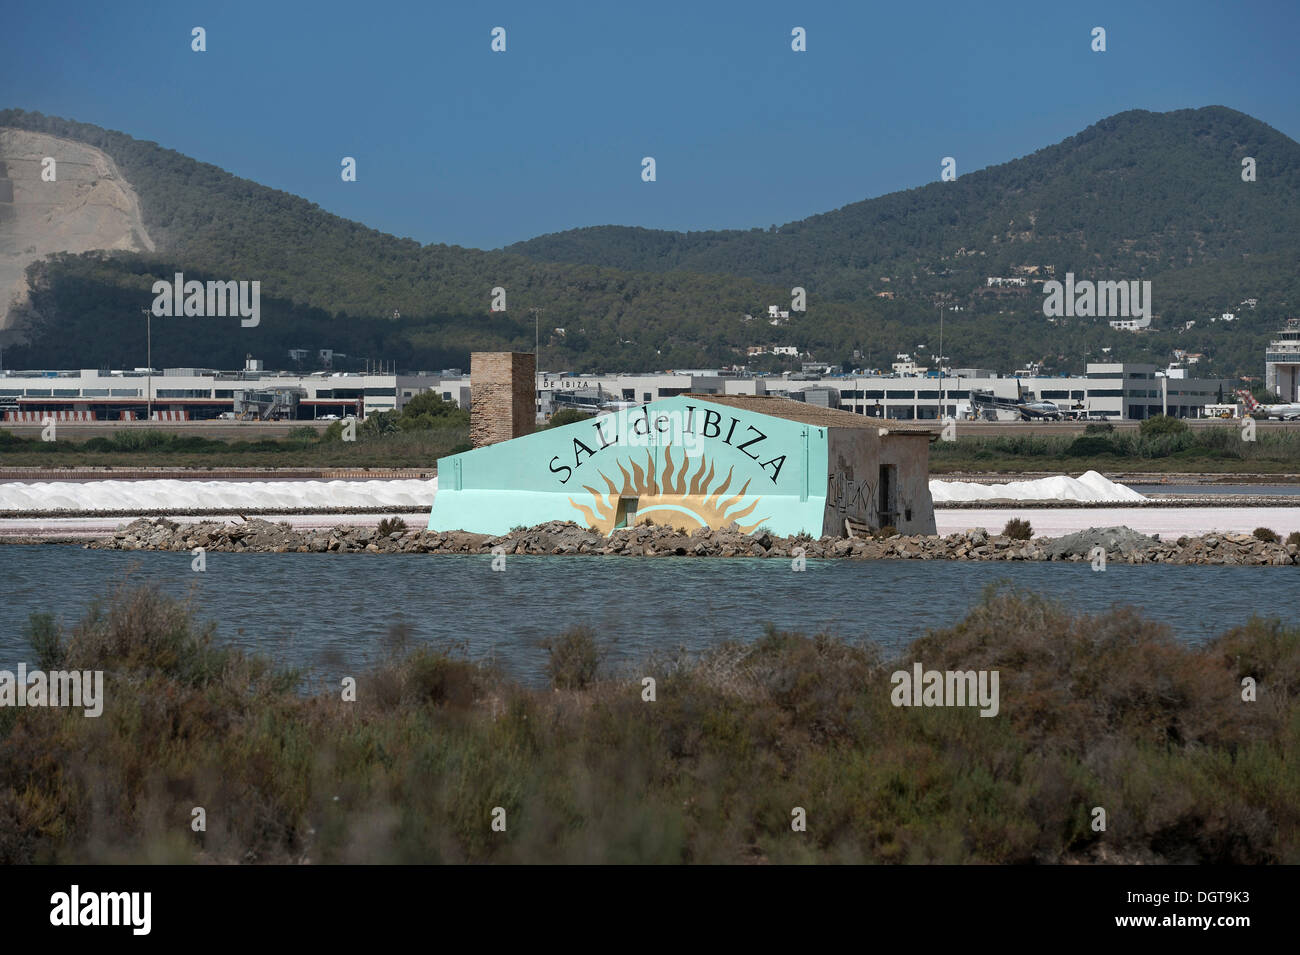 Sal de Ibiza salt pans in front of the airport, Ibiza, Pitiusic Islands or Pine Islands, Balearic Islands, Spain, Europe Stock Photo